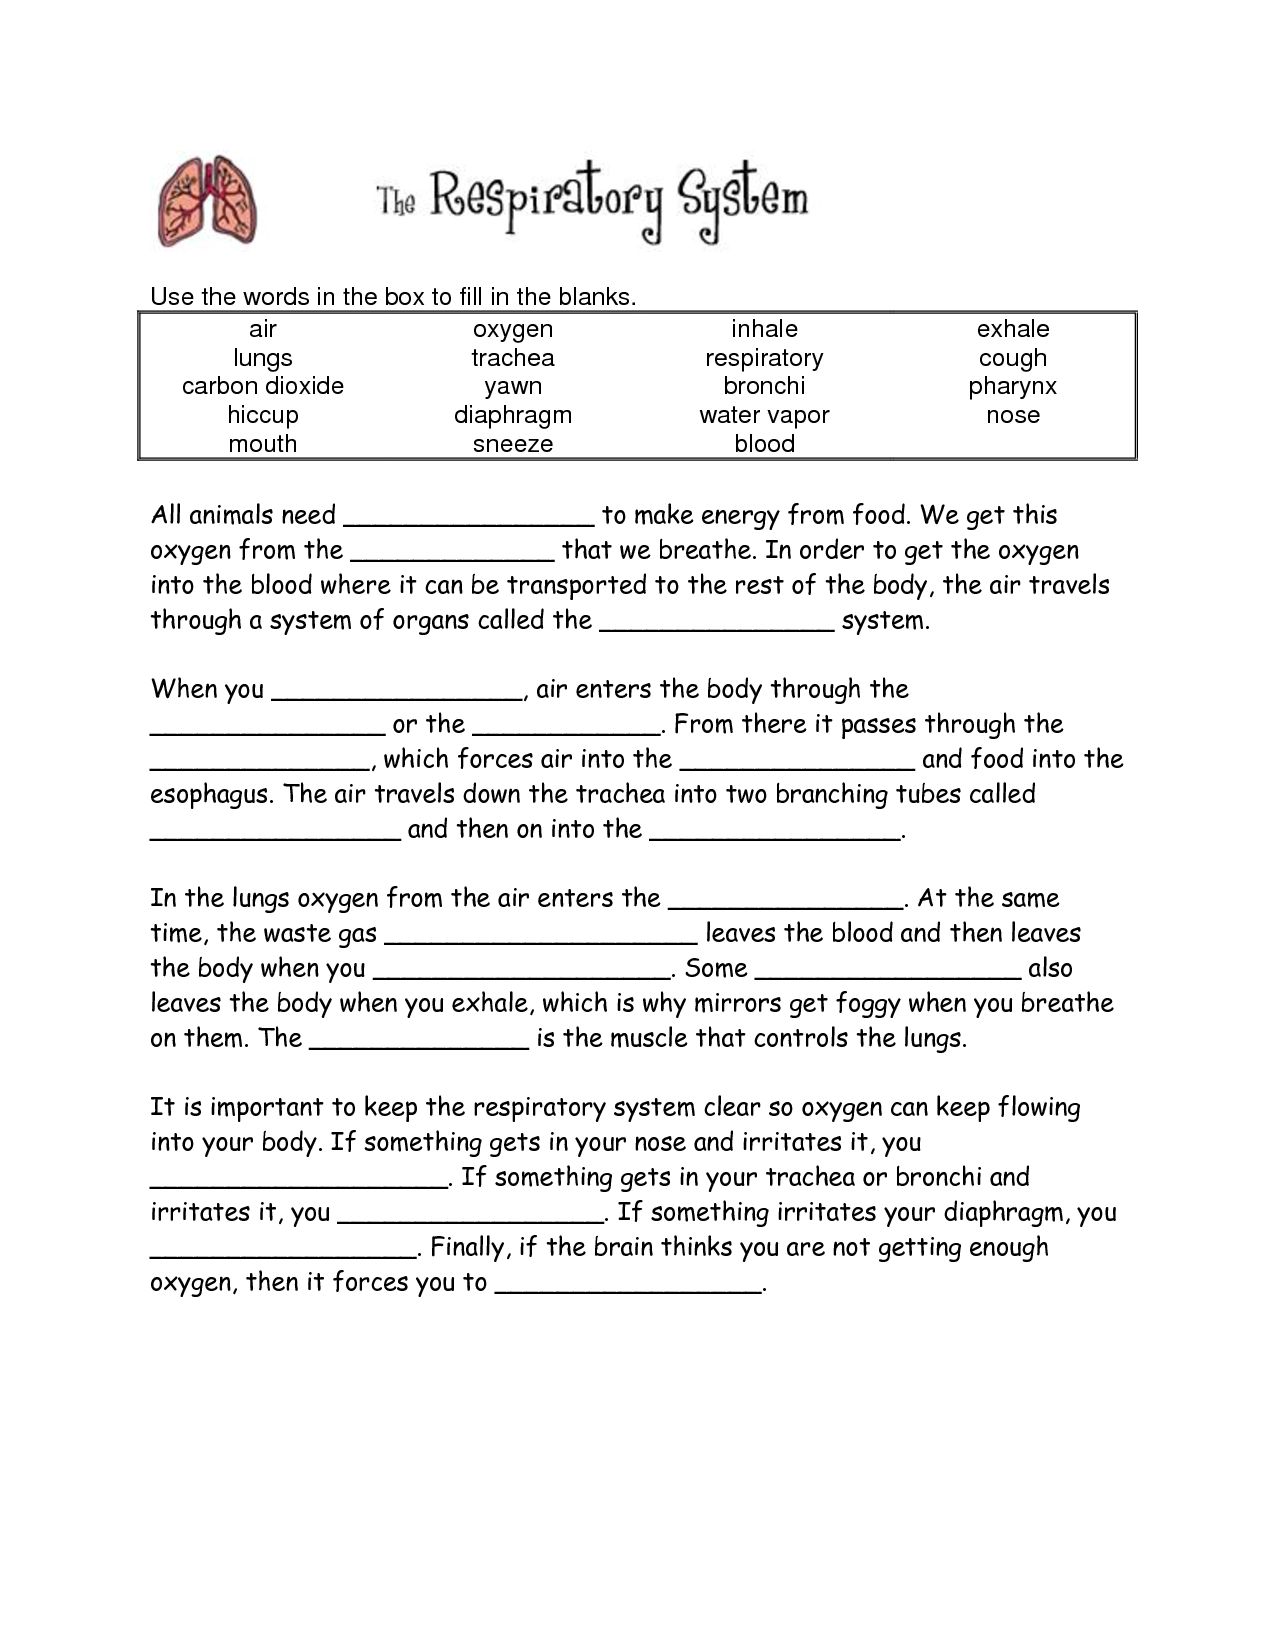 The Respiratory System Fill in Blanks Worksheet Answers Image